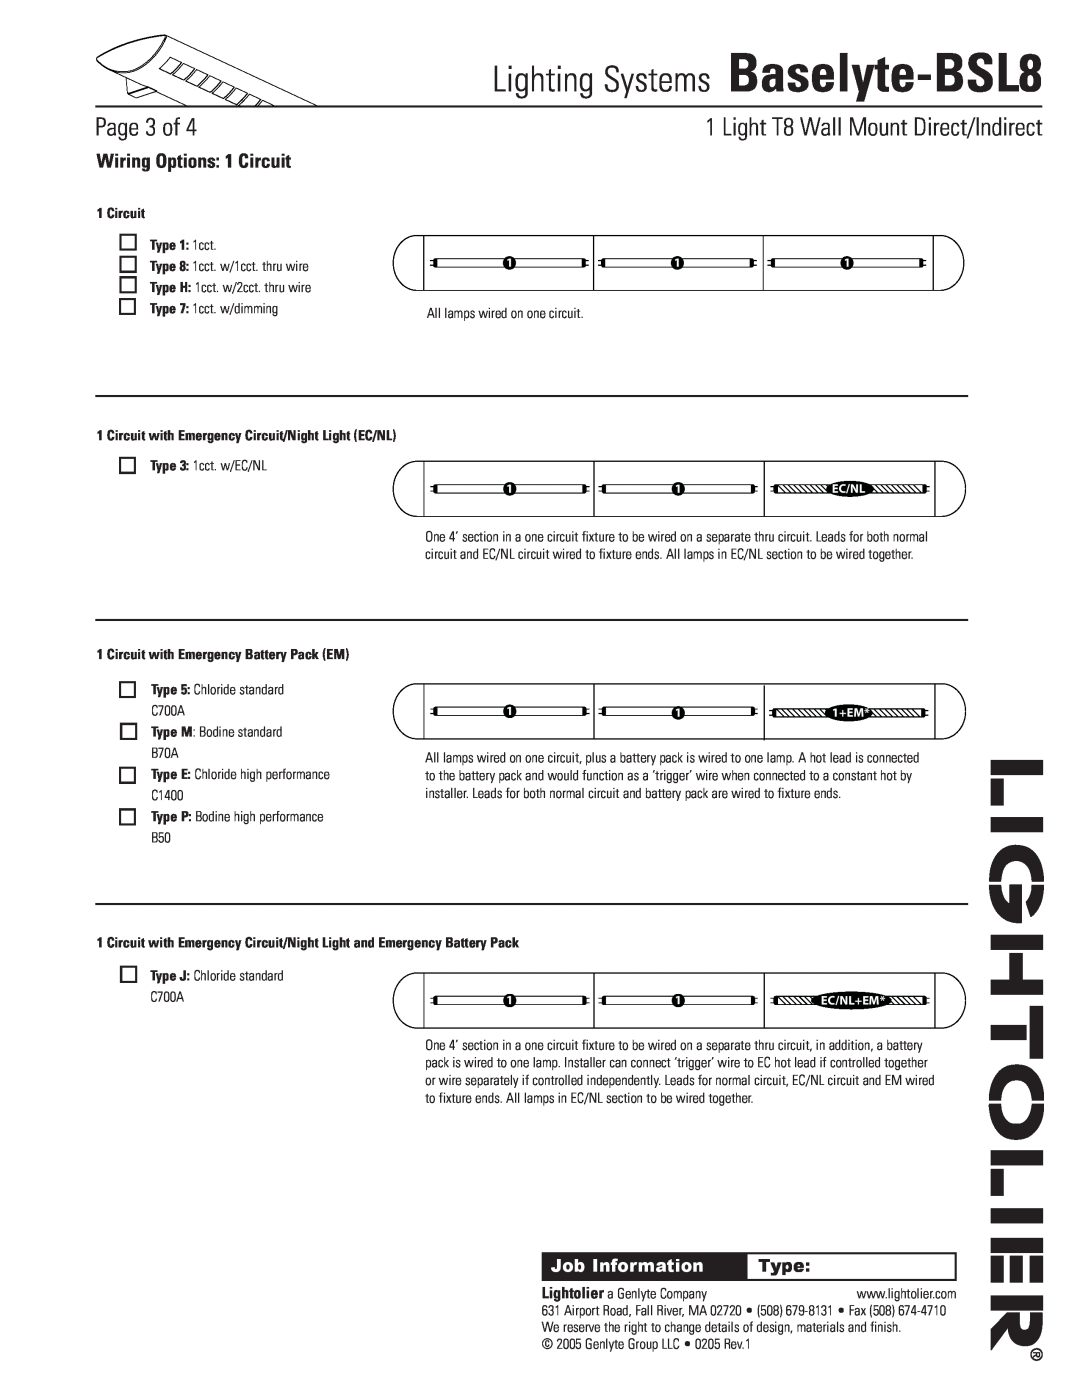 Lightolier Baselyte-BSL8 Wiring Options 1 Circuit, Circuit Type 1 1cct, Circuit with Emergency Battery Pack EM, Page of 